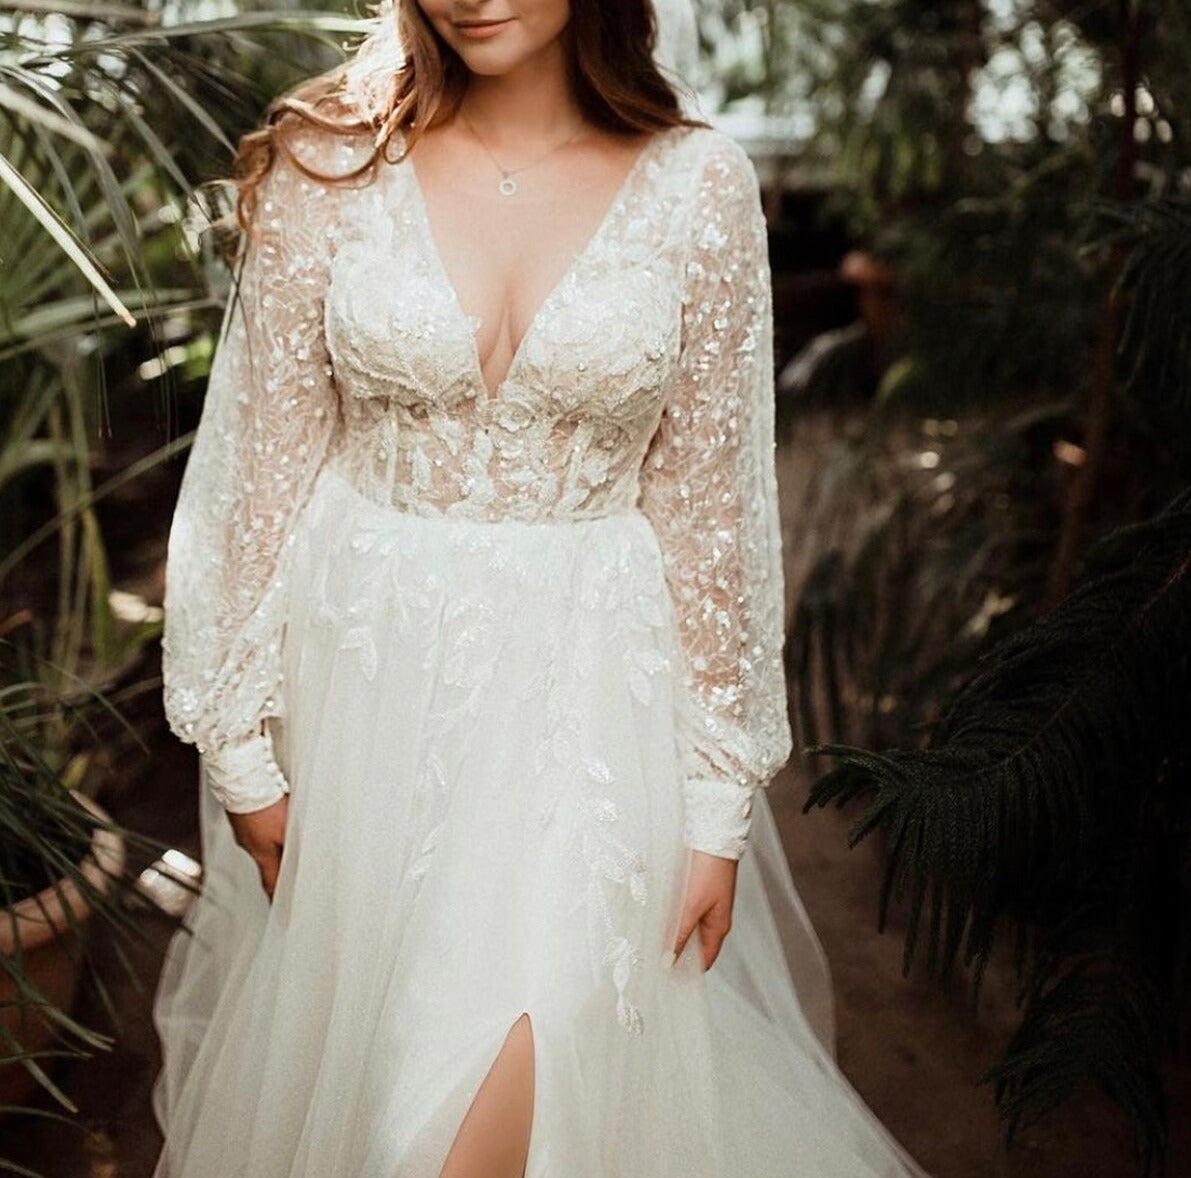 Boho Wedding Dress A-Line Lantern Sleeve Side Slit Lace Appliques Beads Sequined Button Floor Length Sweep Train Bride Gown New - LiveTrendsX